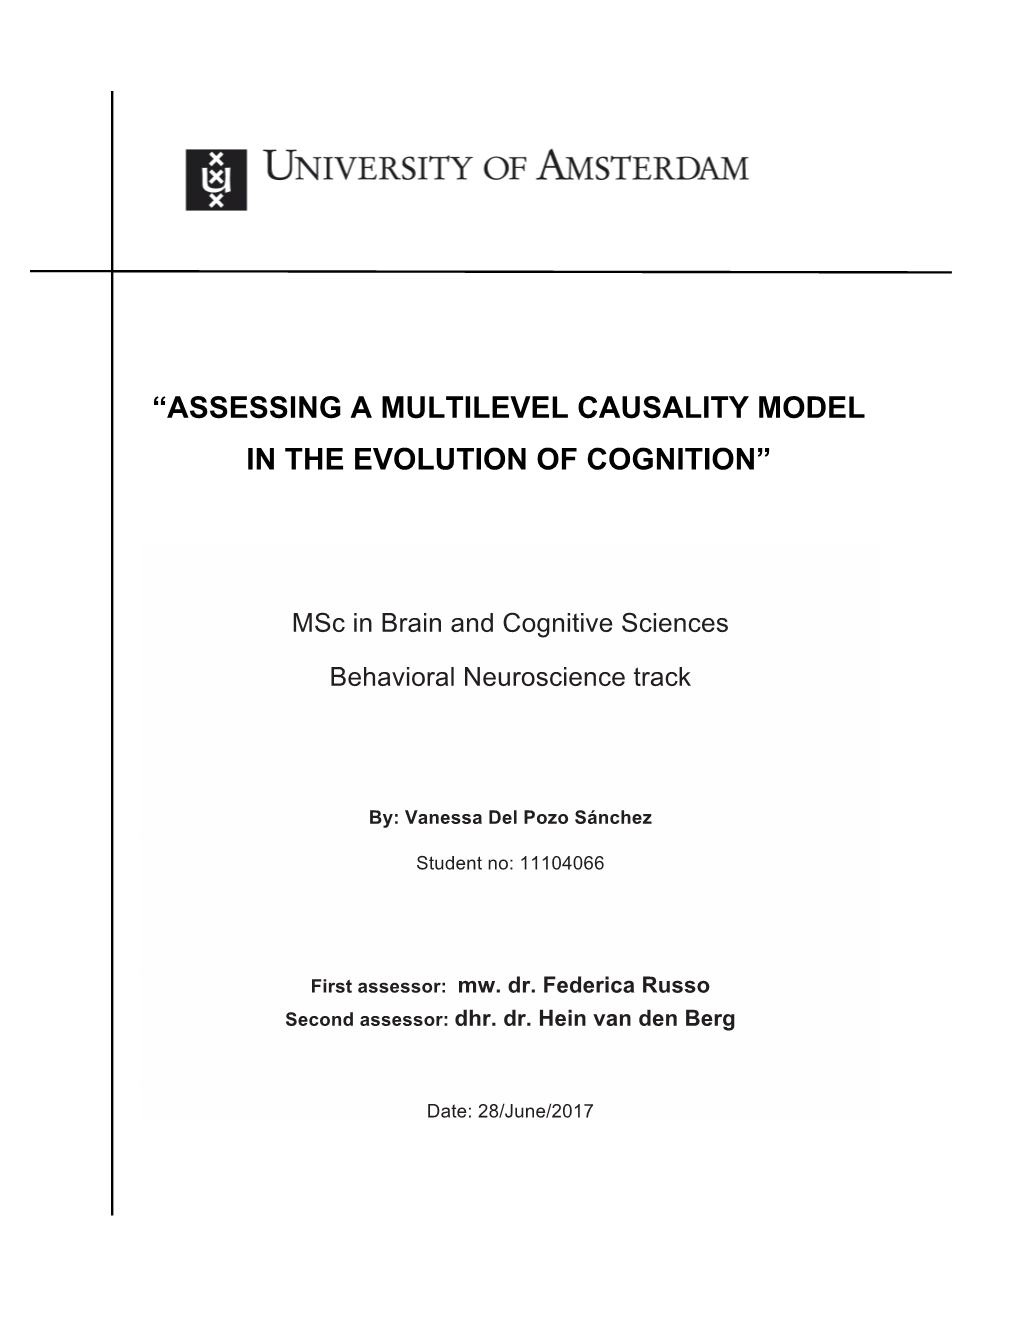 “Assessing a Multilevel Causality Model in the Evolution of Cognition”